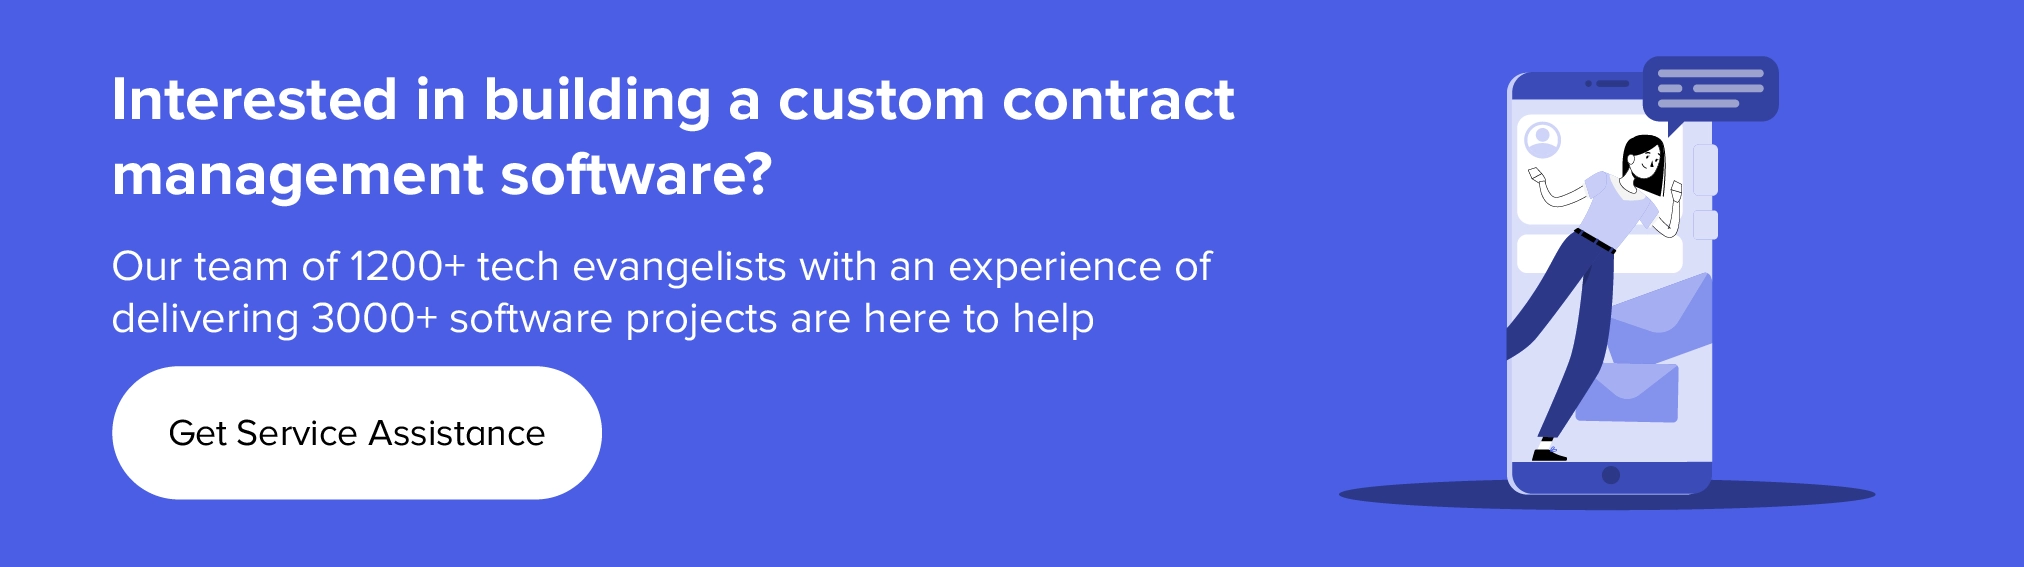 Building a custom contract management software